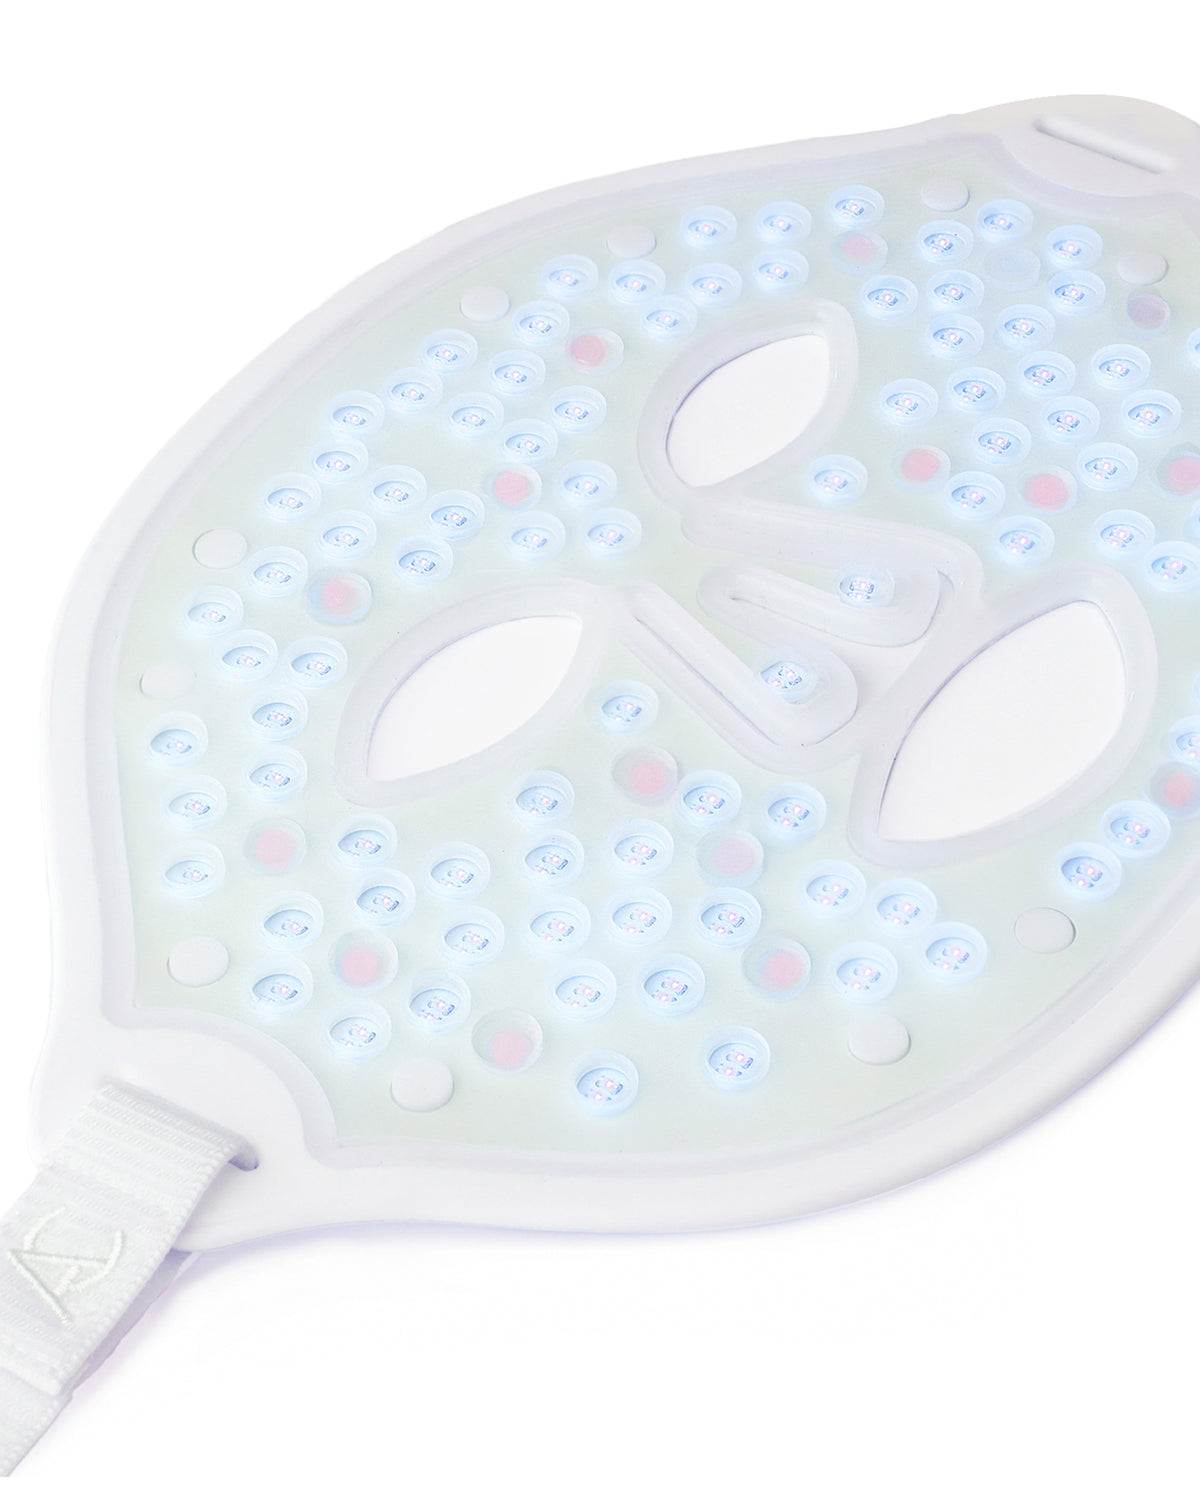 Crystal Led Anti-Acne And Anti-Aging Face Mask